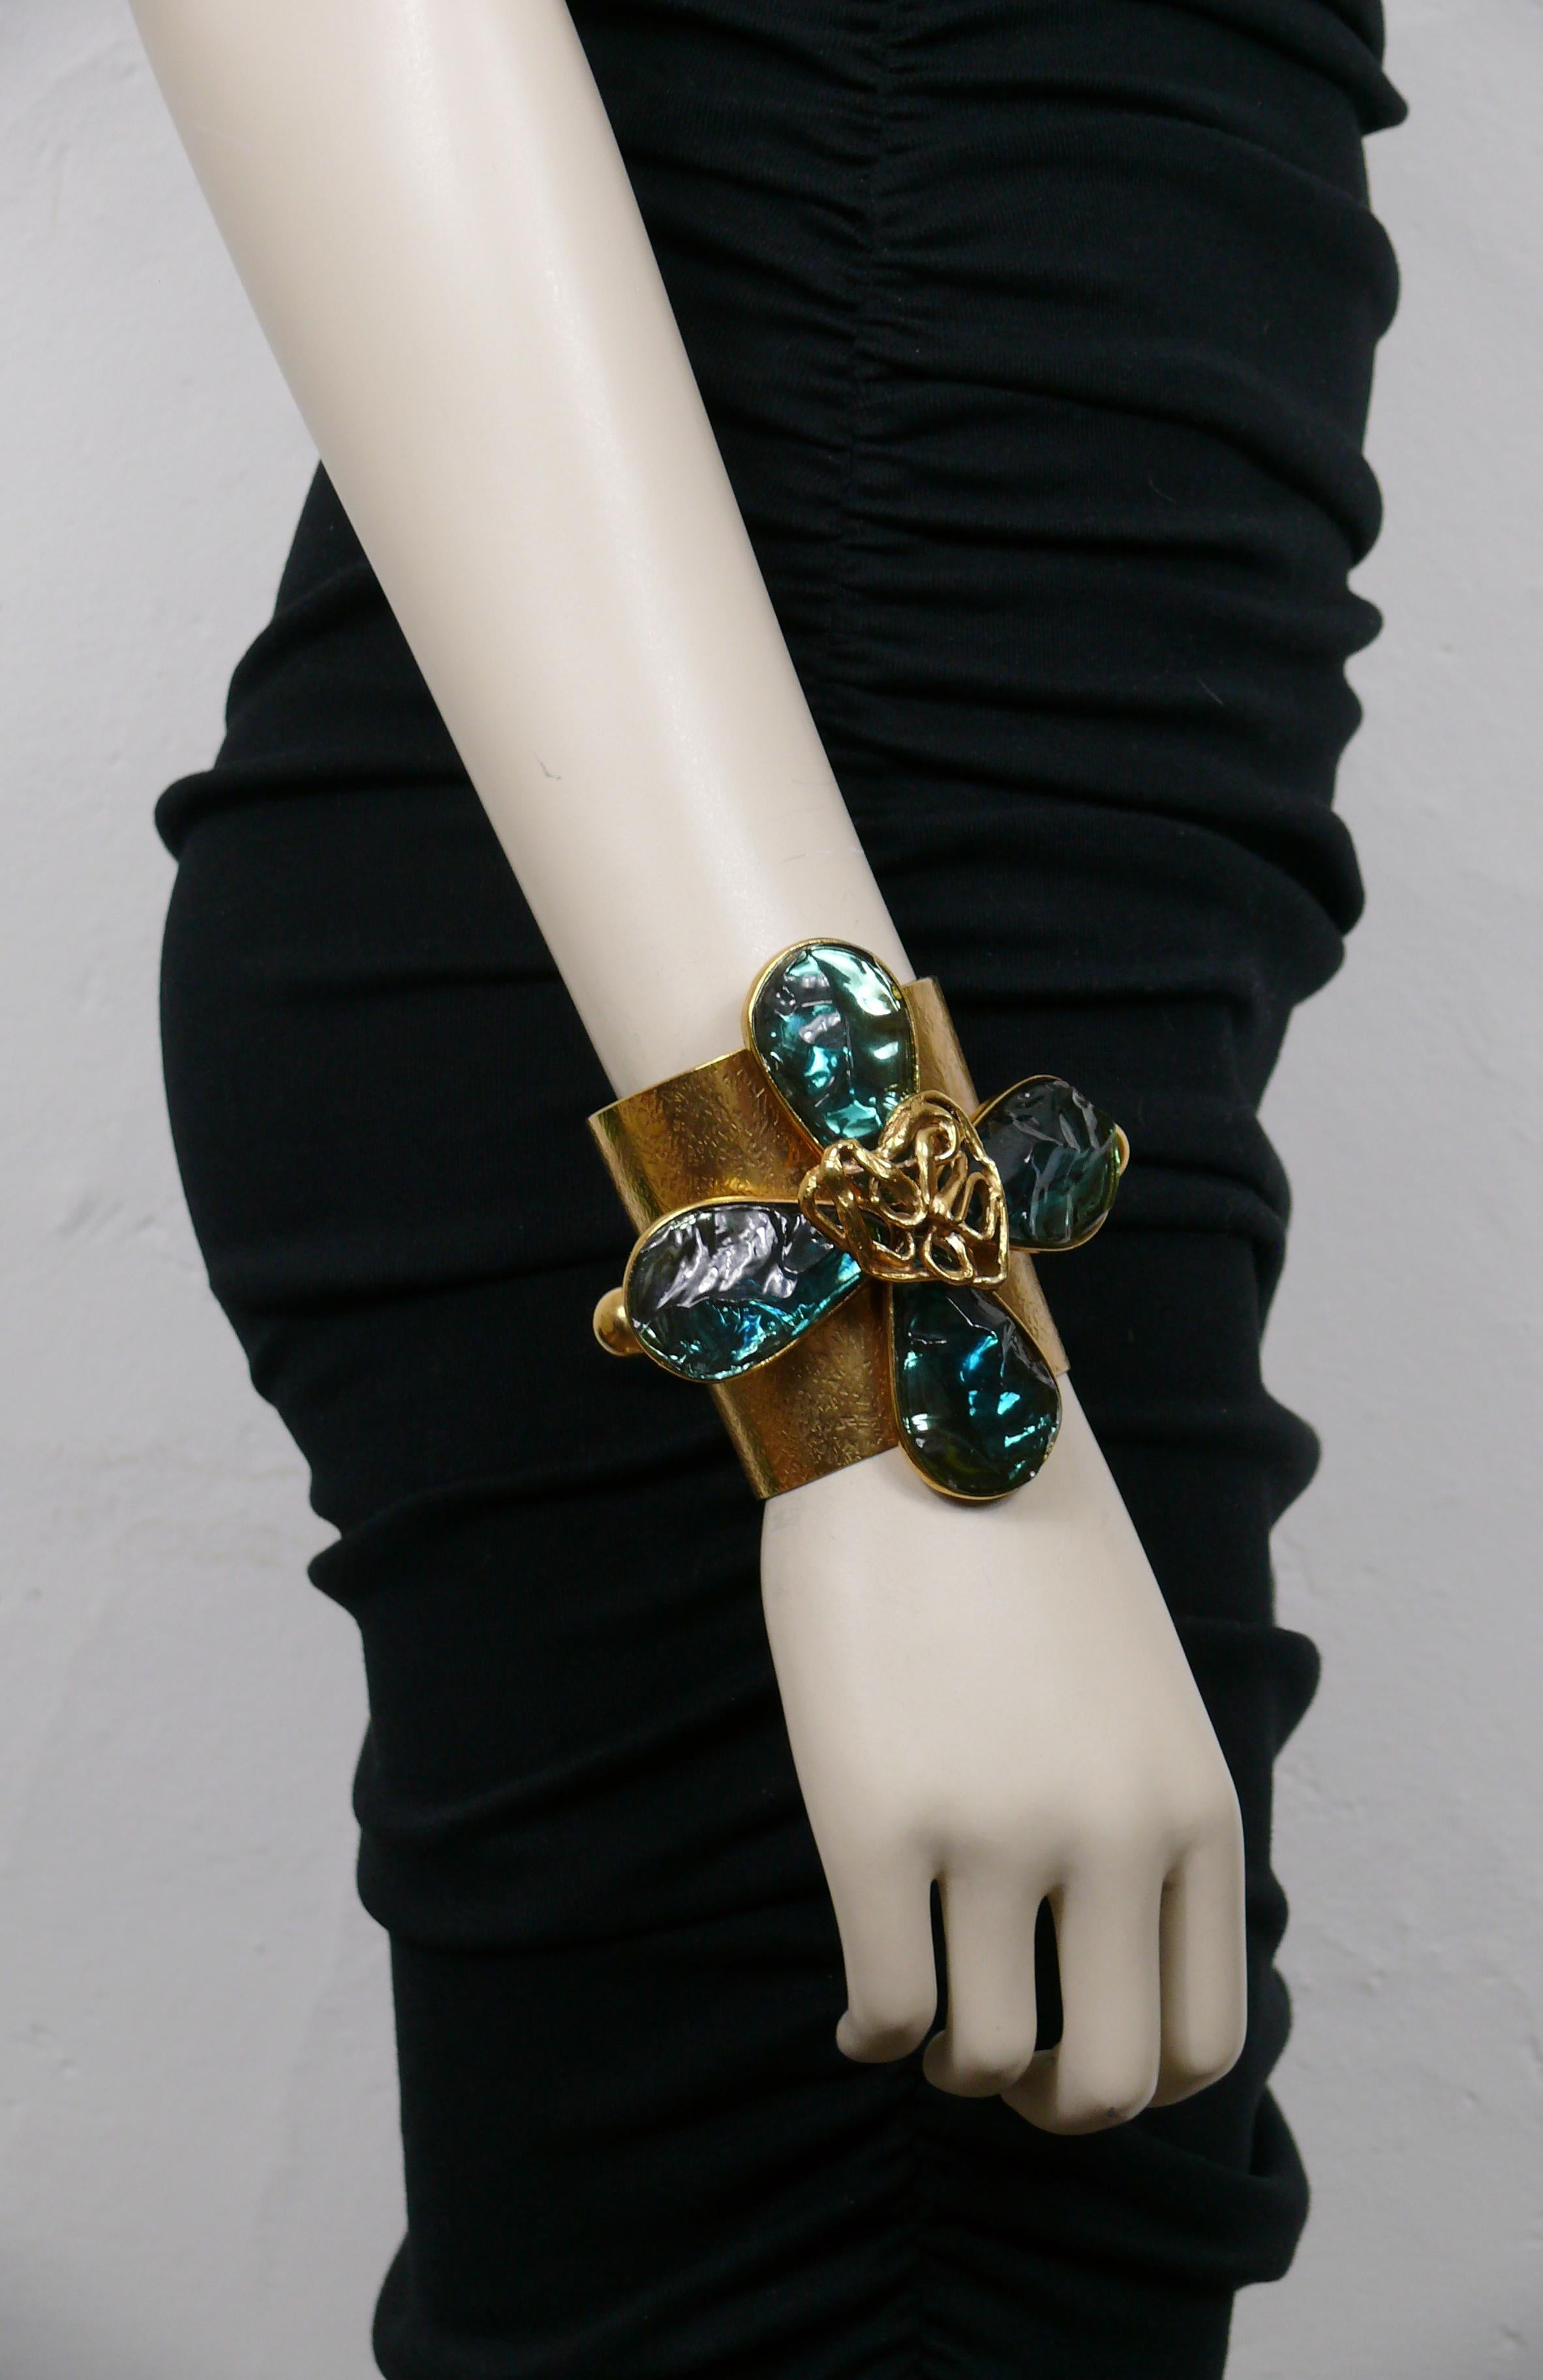 YVES SAINT LAURENT by ROBERT GOOSSENS vintage rare textured gold tone cuff bracelet featuring a massive stylized four clover centrepiece embellished with irregular shaped acqua blue resin petals and an openwork heart.

Embossed YVES SAINT LAURENT